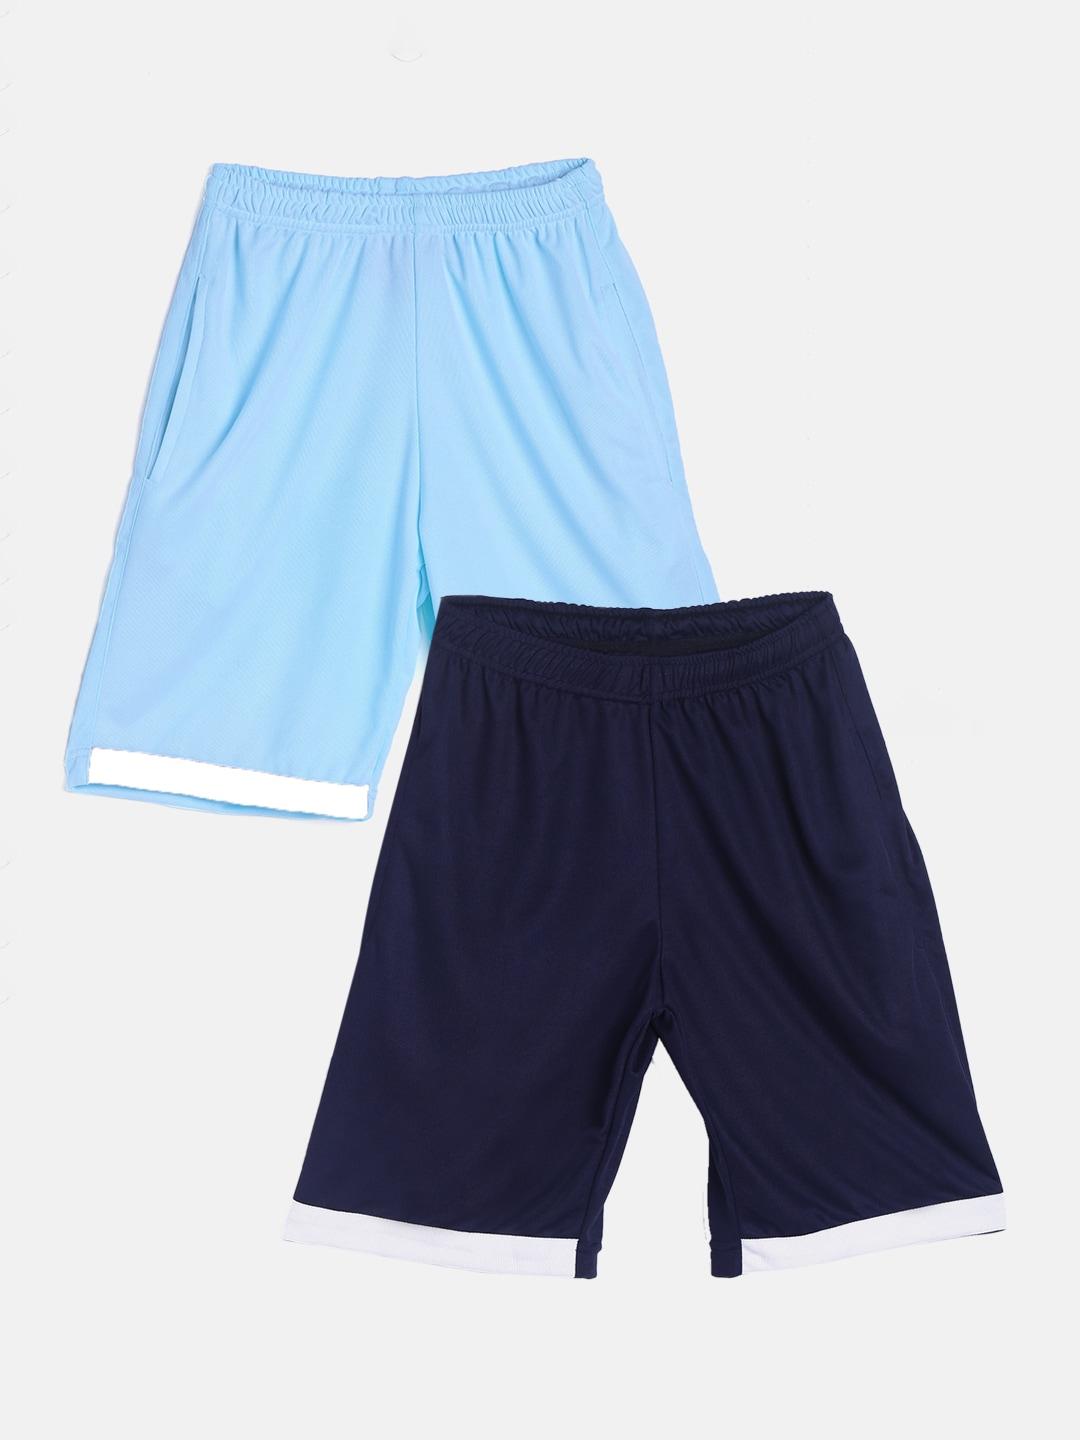 tiny hug boys pack of 2 blue high-rise outdoor sports shorts